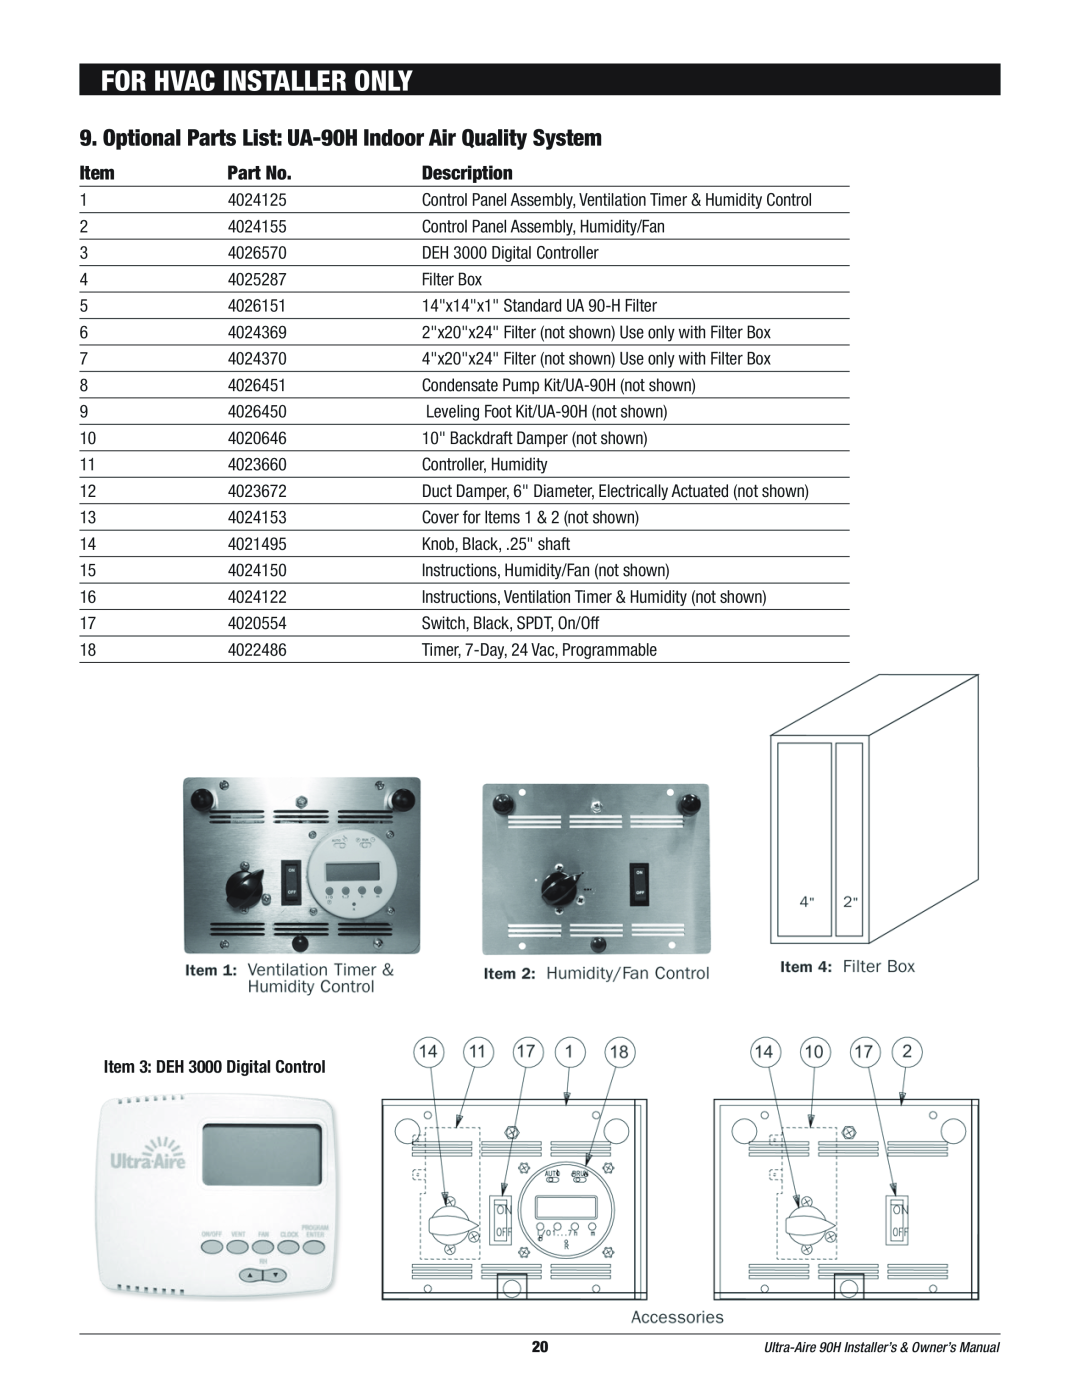 Therma-Stor Products Group 90H owner manual For Hvac Installer Only, Description, Item 3 DEH 3000 Digital Control 